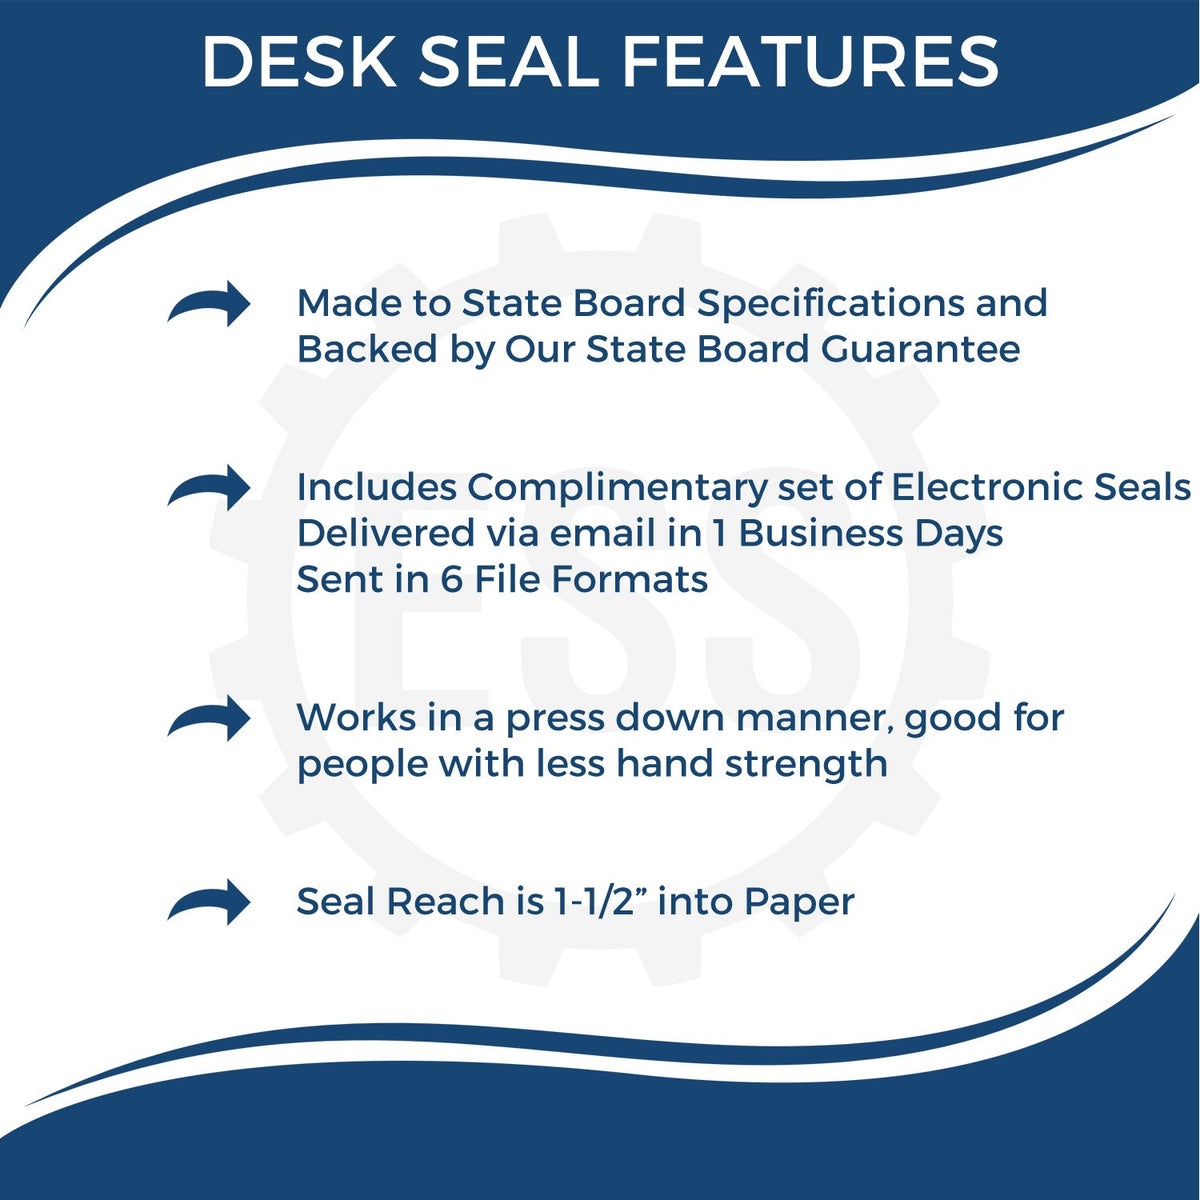 A picture of an infographic highlighting the selling points for the Oregon Geologist Desk Seal